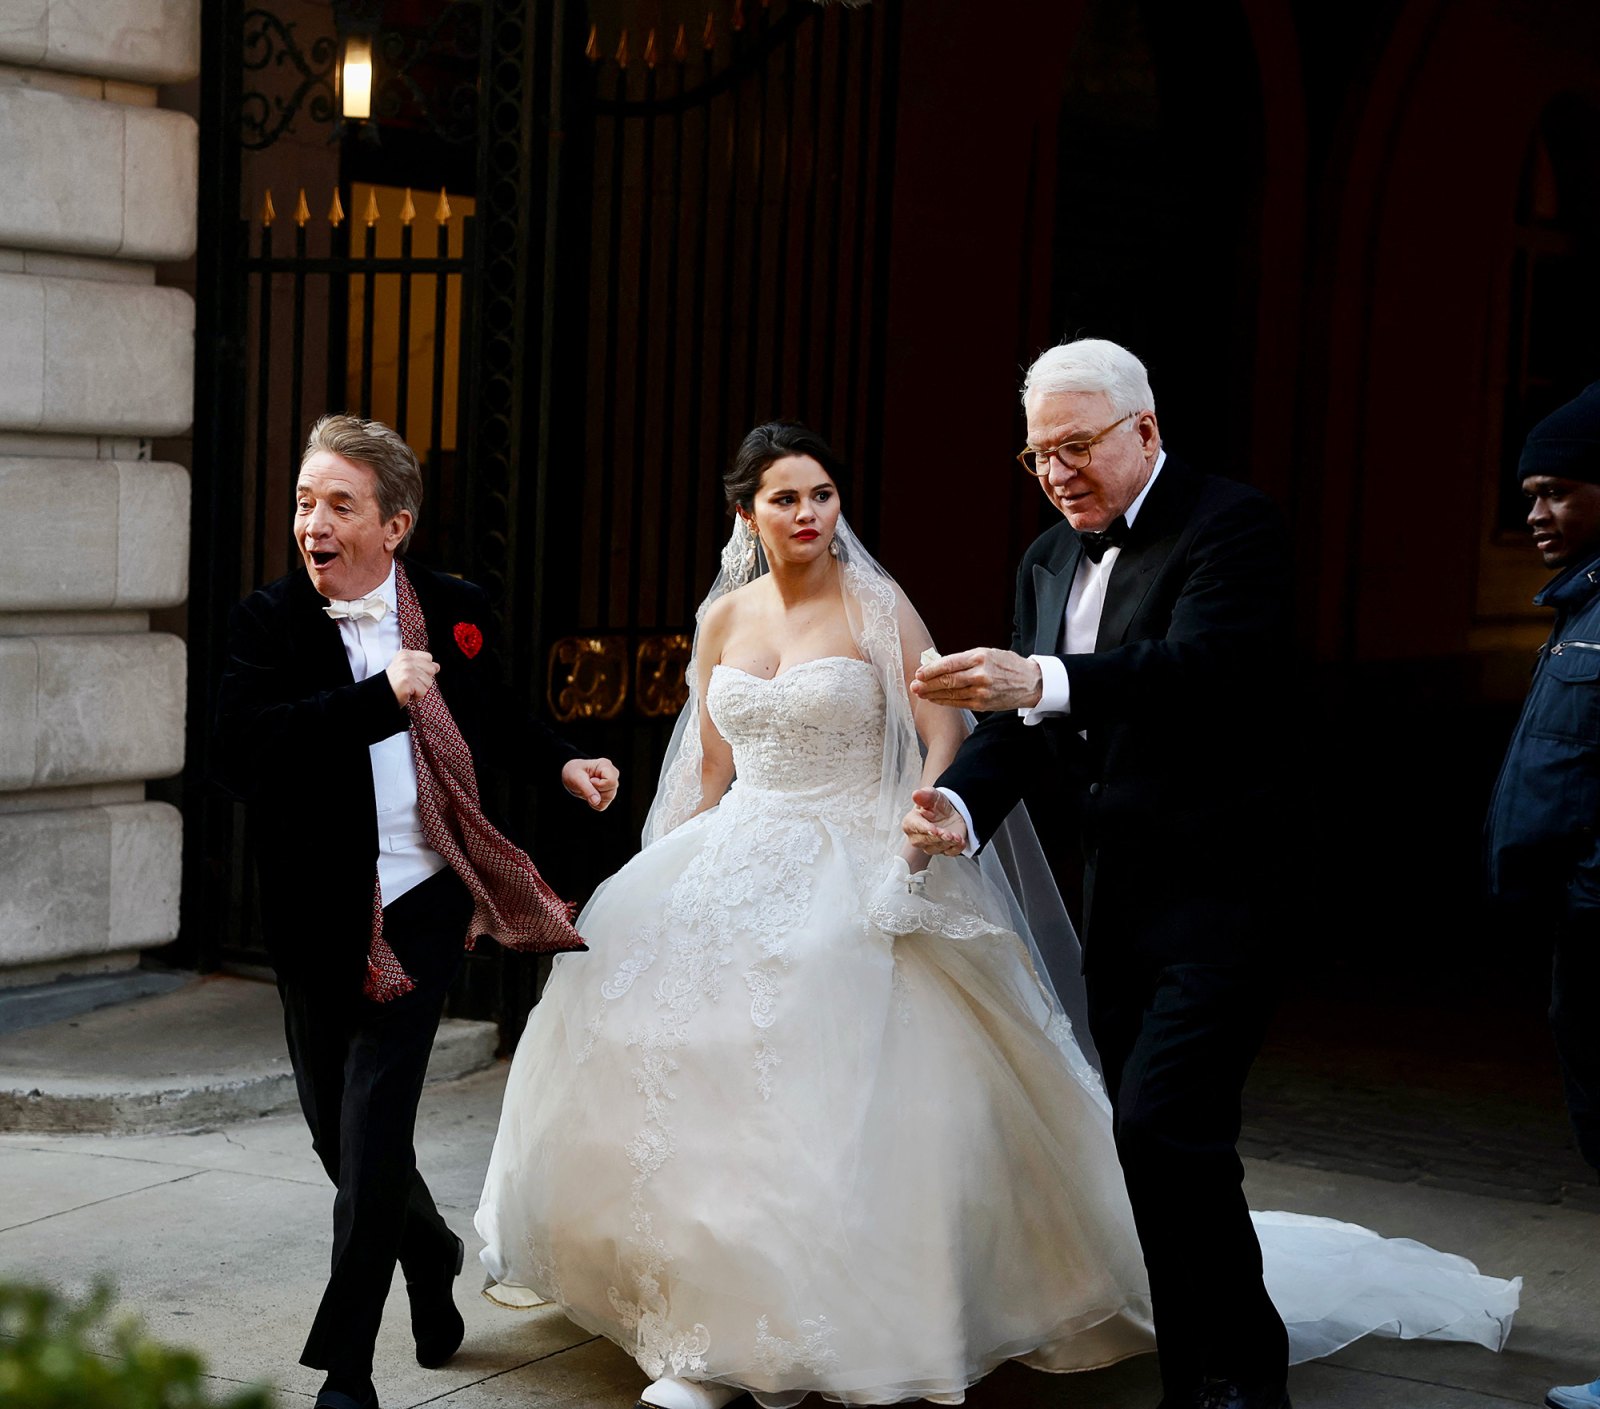 Steve Martin Recreates 'Father of the Bride' Photo With 'Only Murders in the Building' Costar Selena Gomez - 074